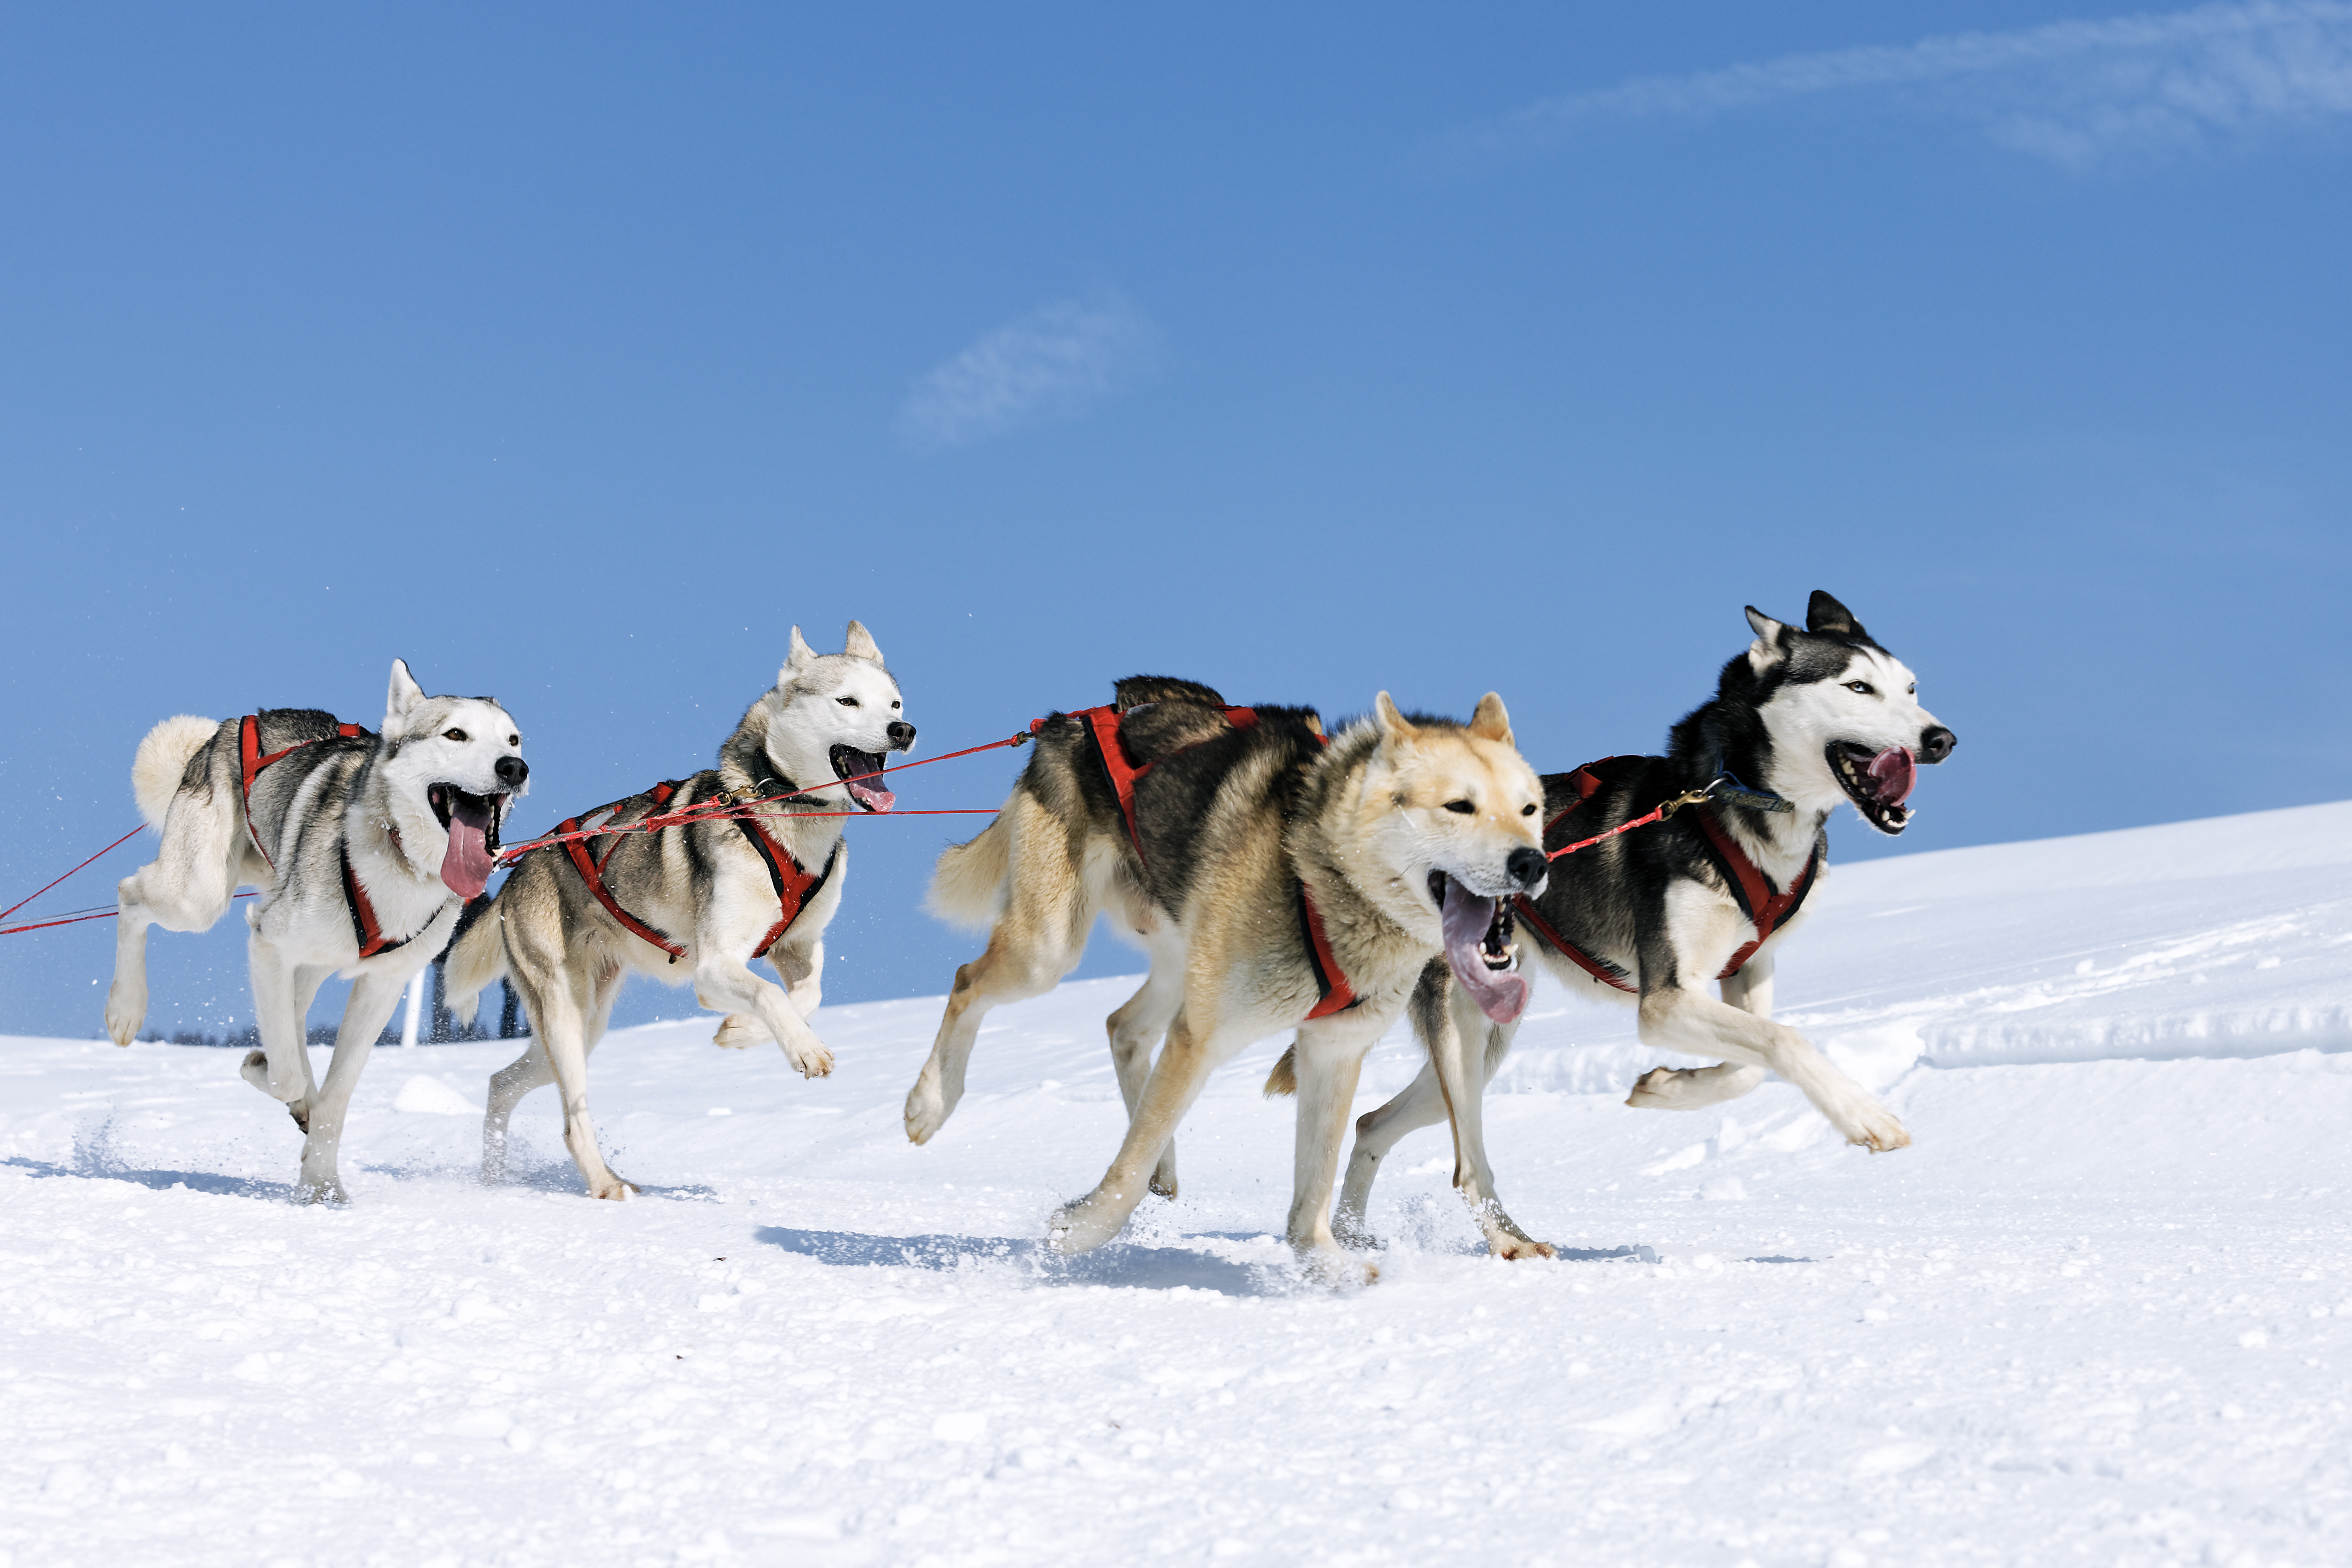 Extraordinary 8 Day Alaska Vacation to Make Memories with Your Family - Sled Dogs